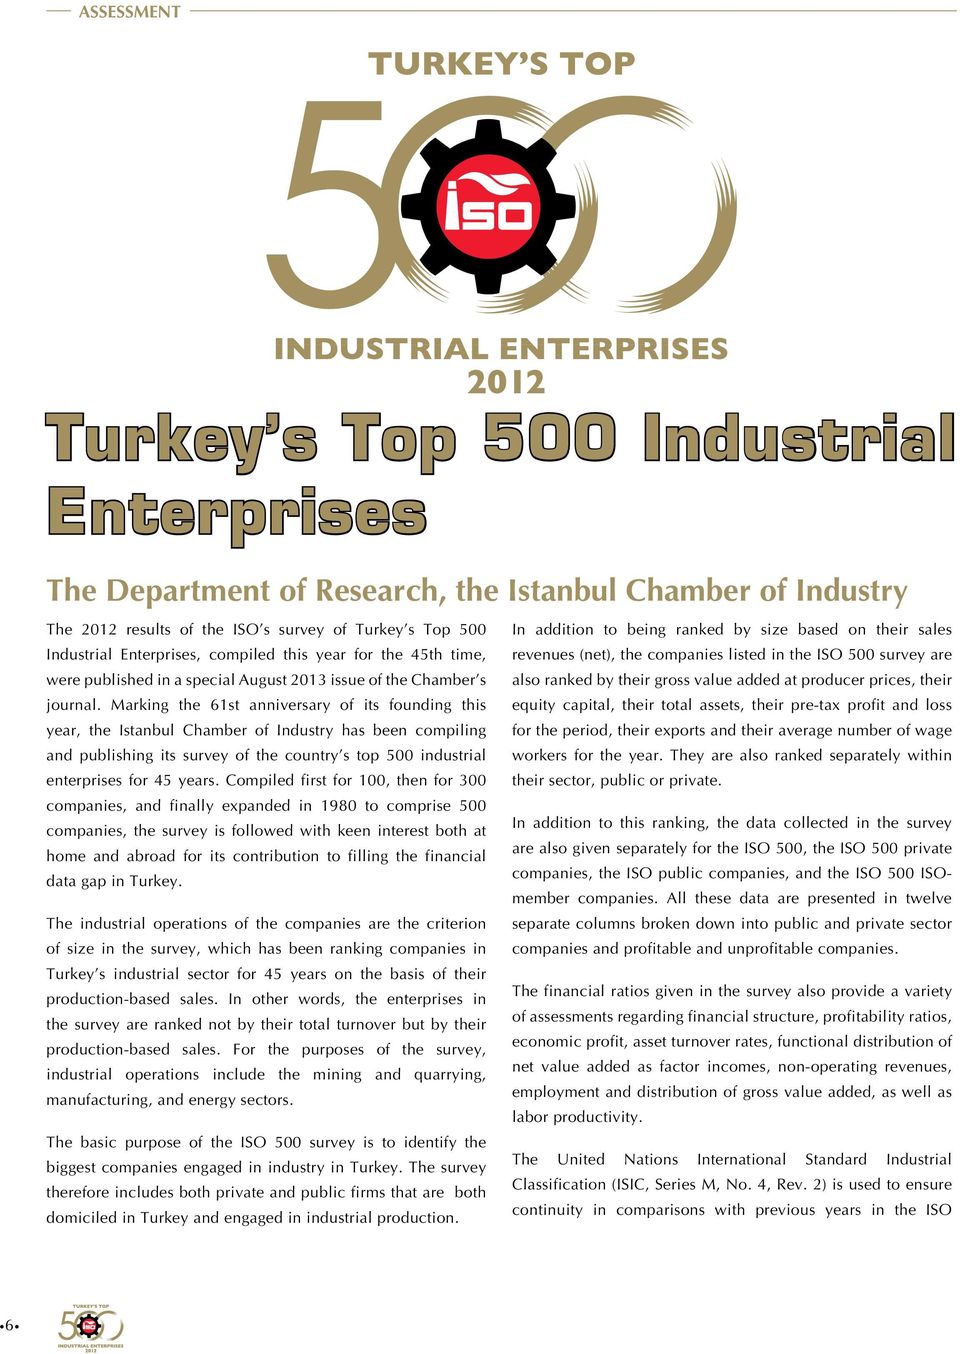 Marking the 61st anniversary of its founding this year, the Istanbul Chamber of Industry has been compiling and publishing its survey of the country s top 500 industrial enterprises for 45 years.